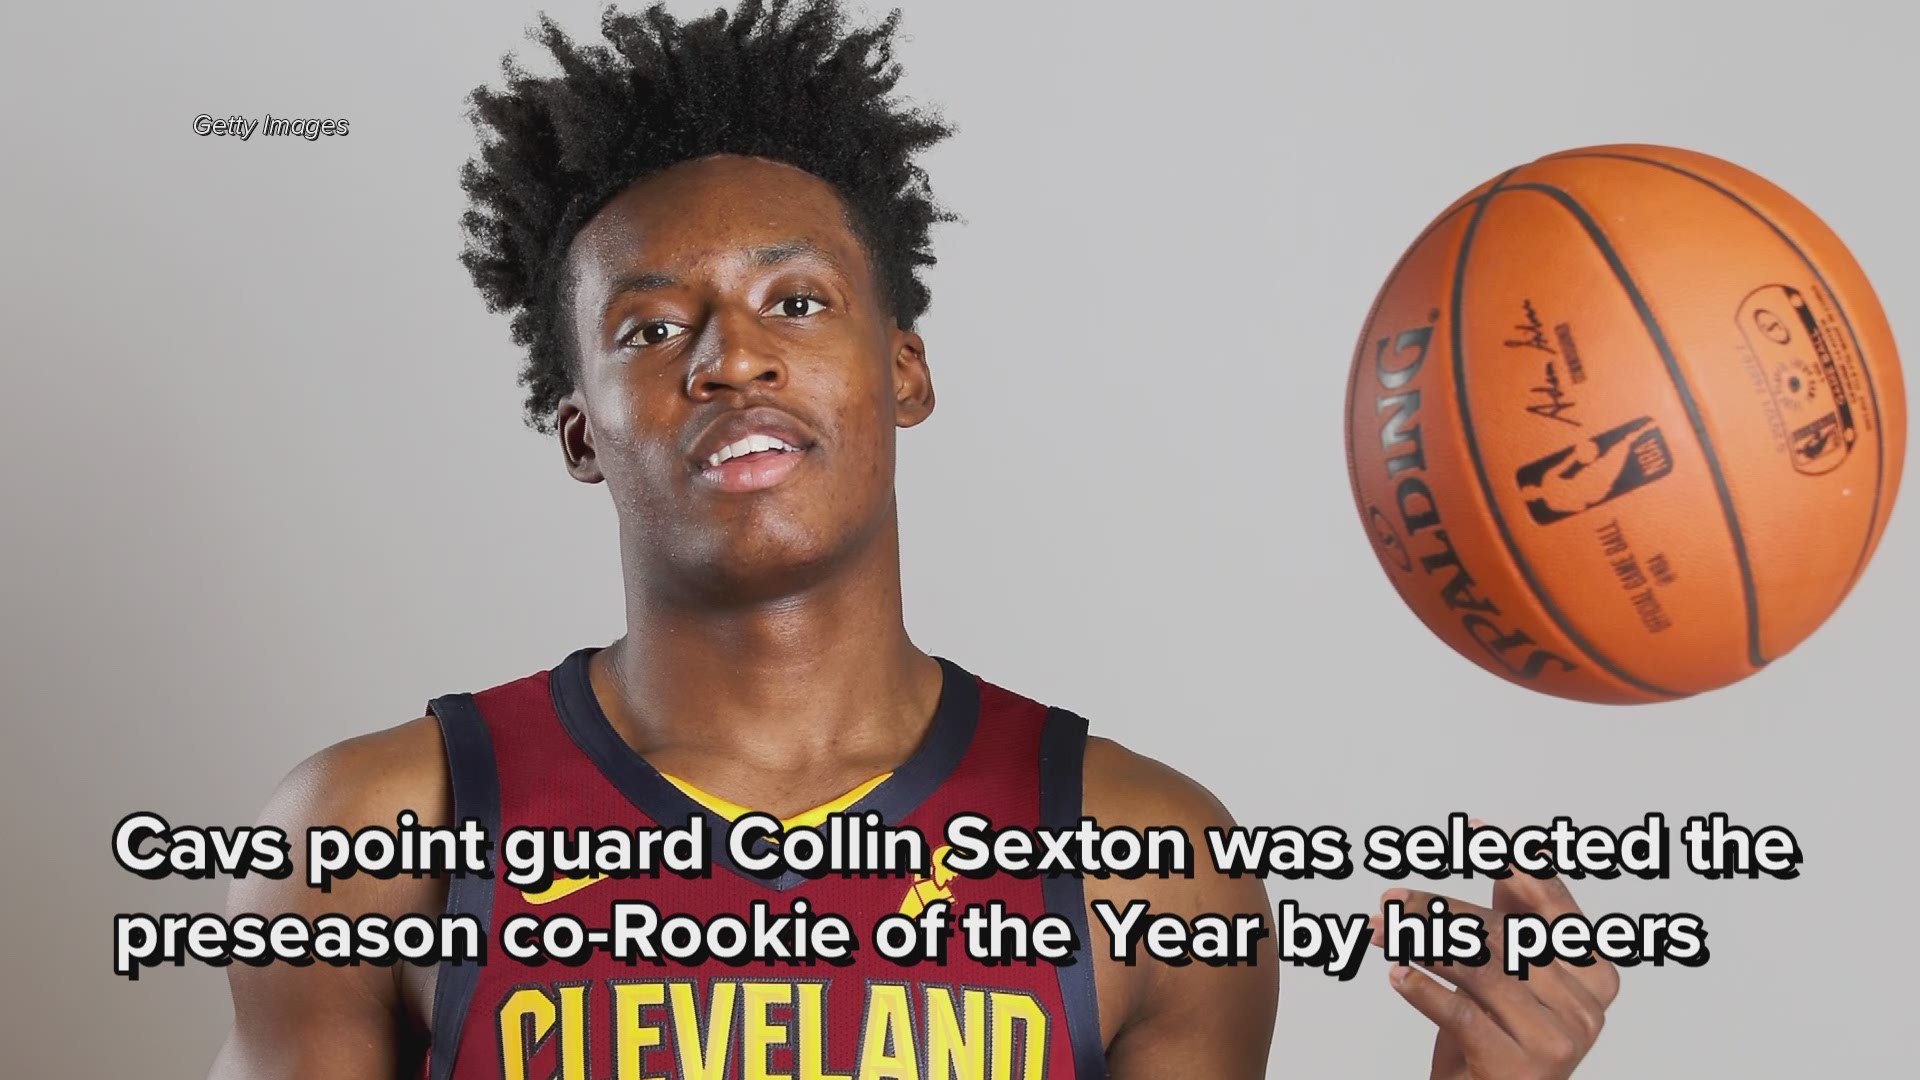 Cleveland Cavaliers PG Collin Sexton tabbed as co-Rookie of the Year in NBA survey